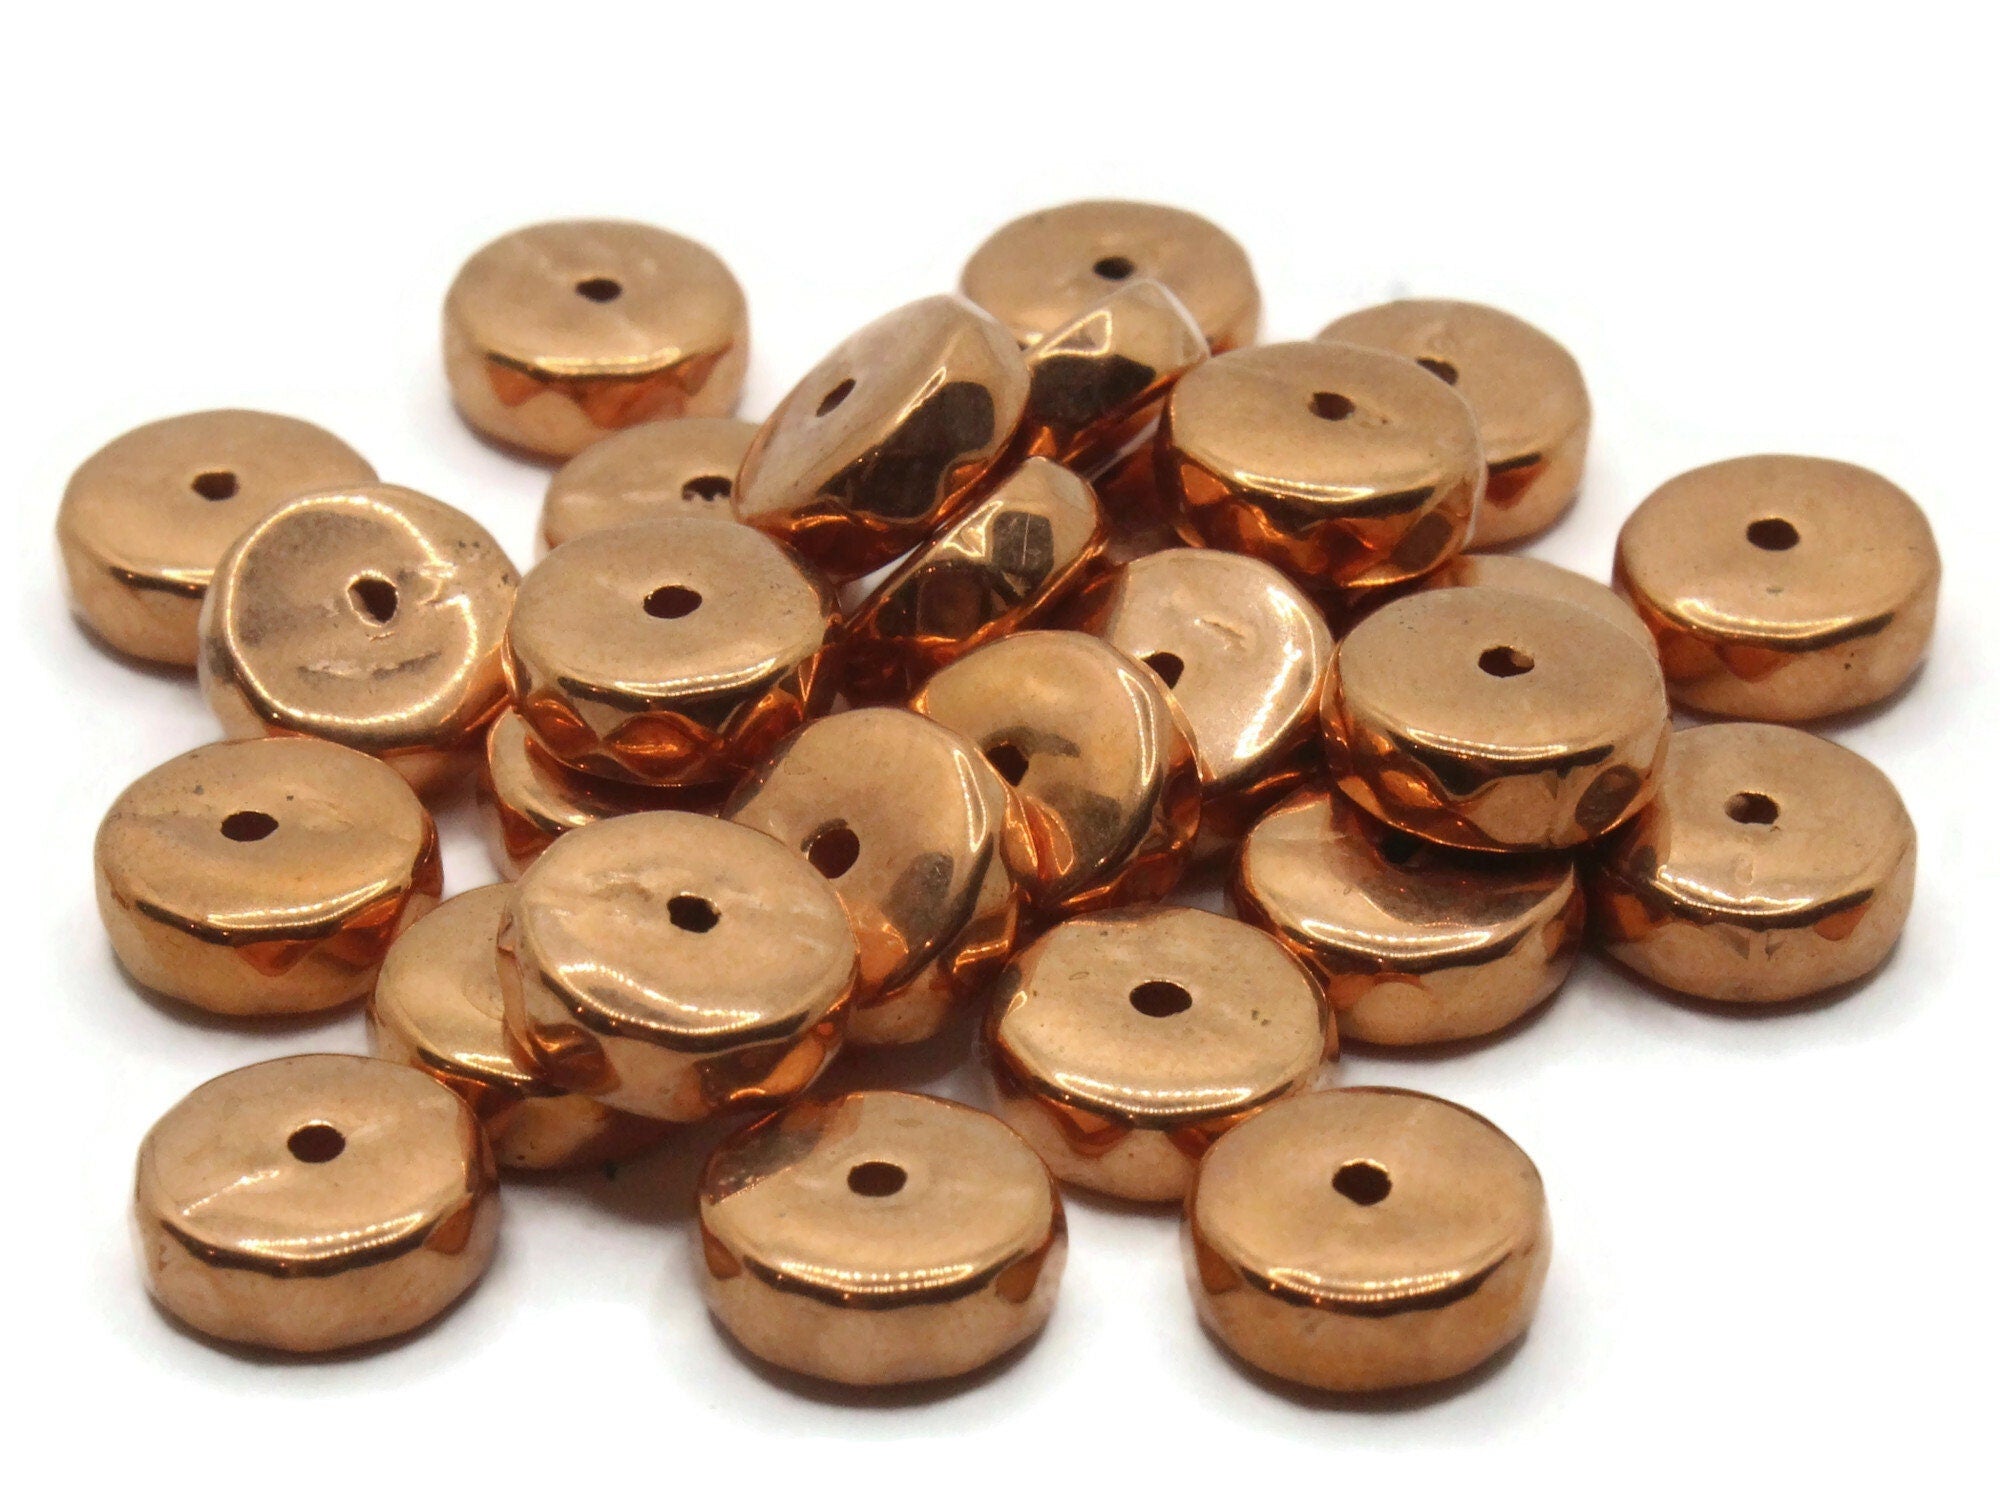 Heather's cf 500 Pieces Copper Tiny Bead Caps Findings (Fit 8mm 10mm Round  Beads) for Jewelry Making